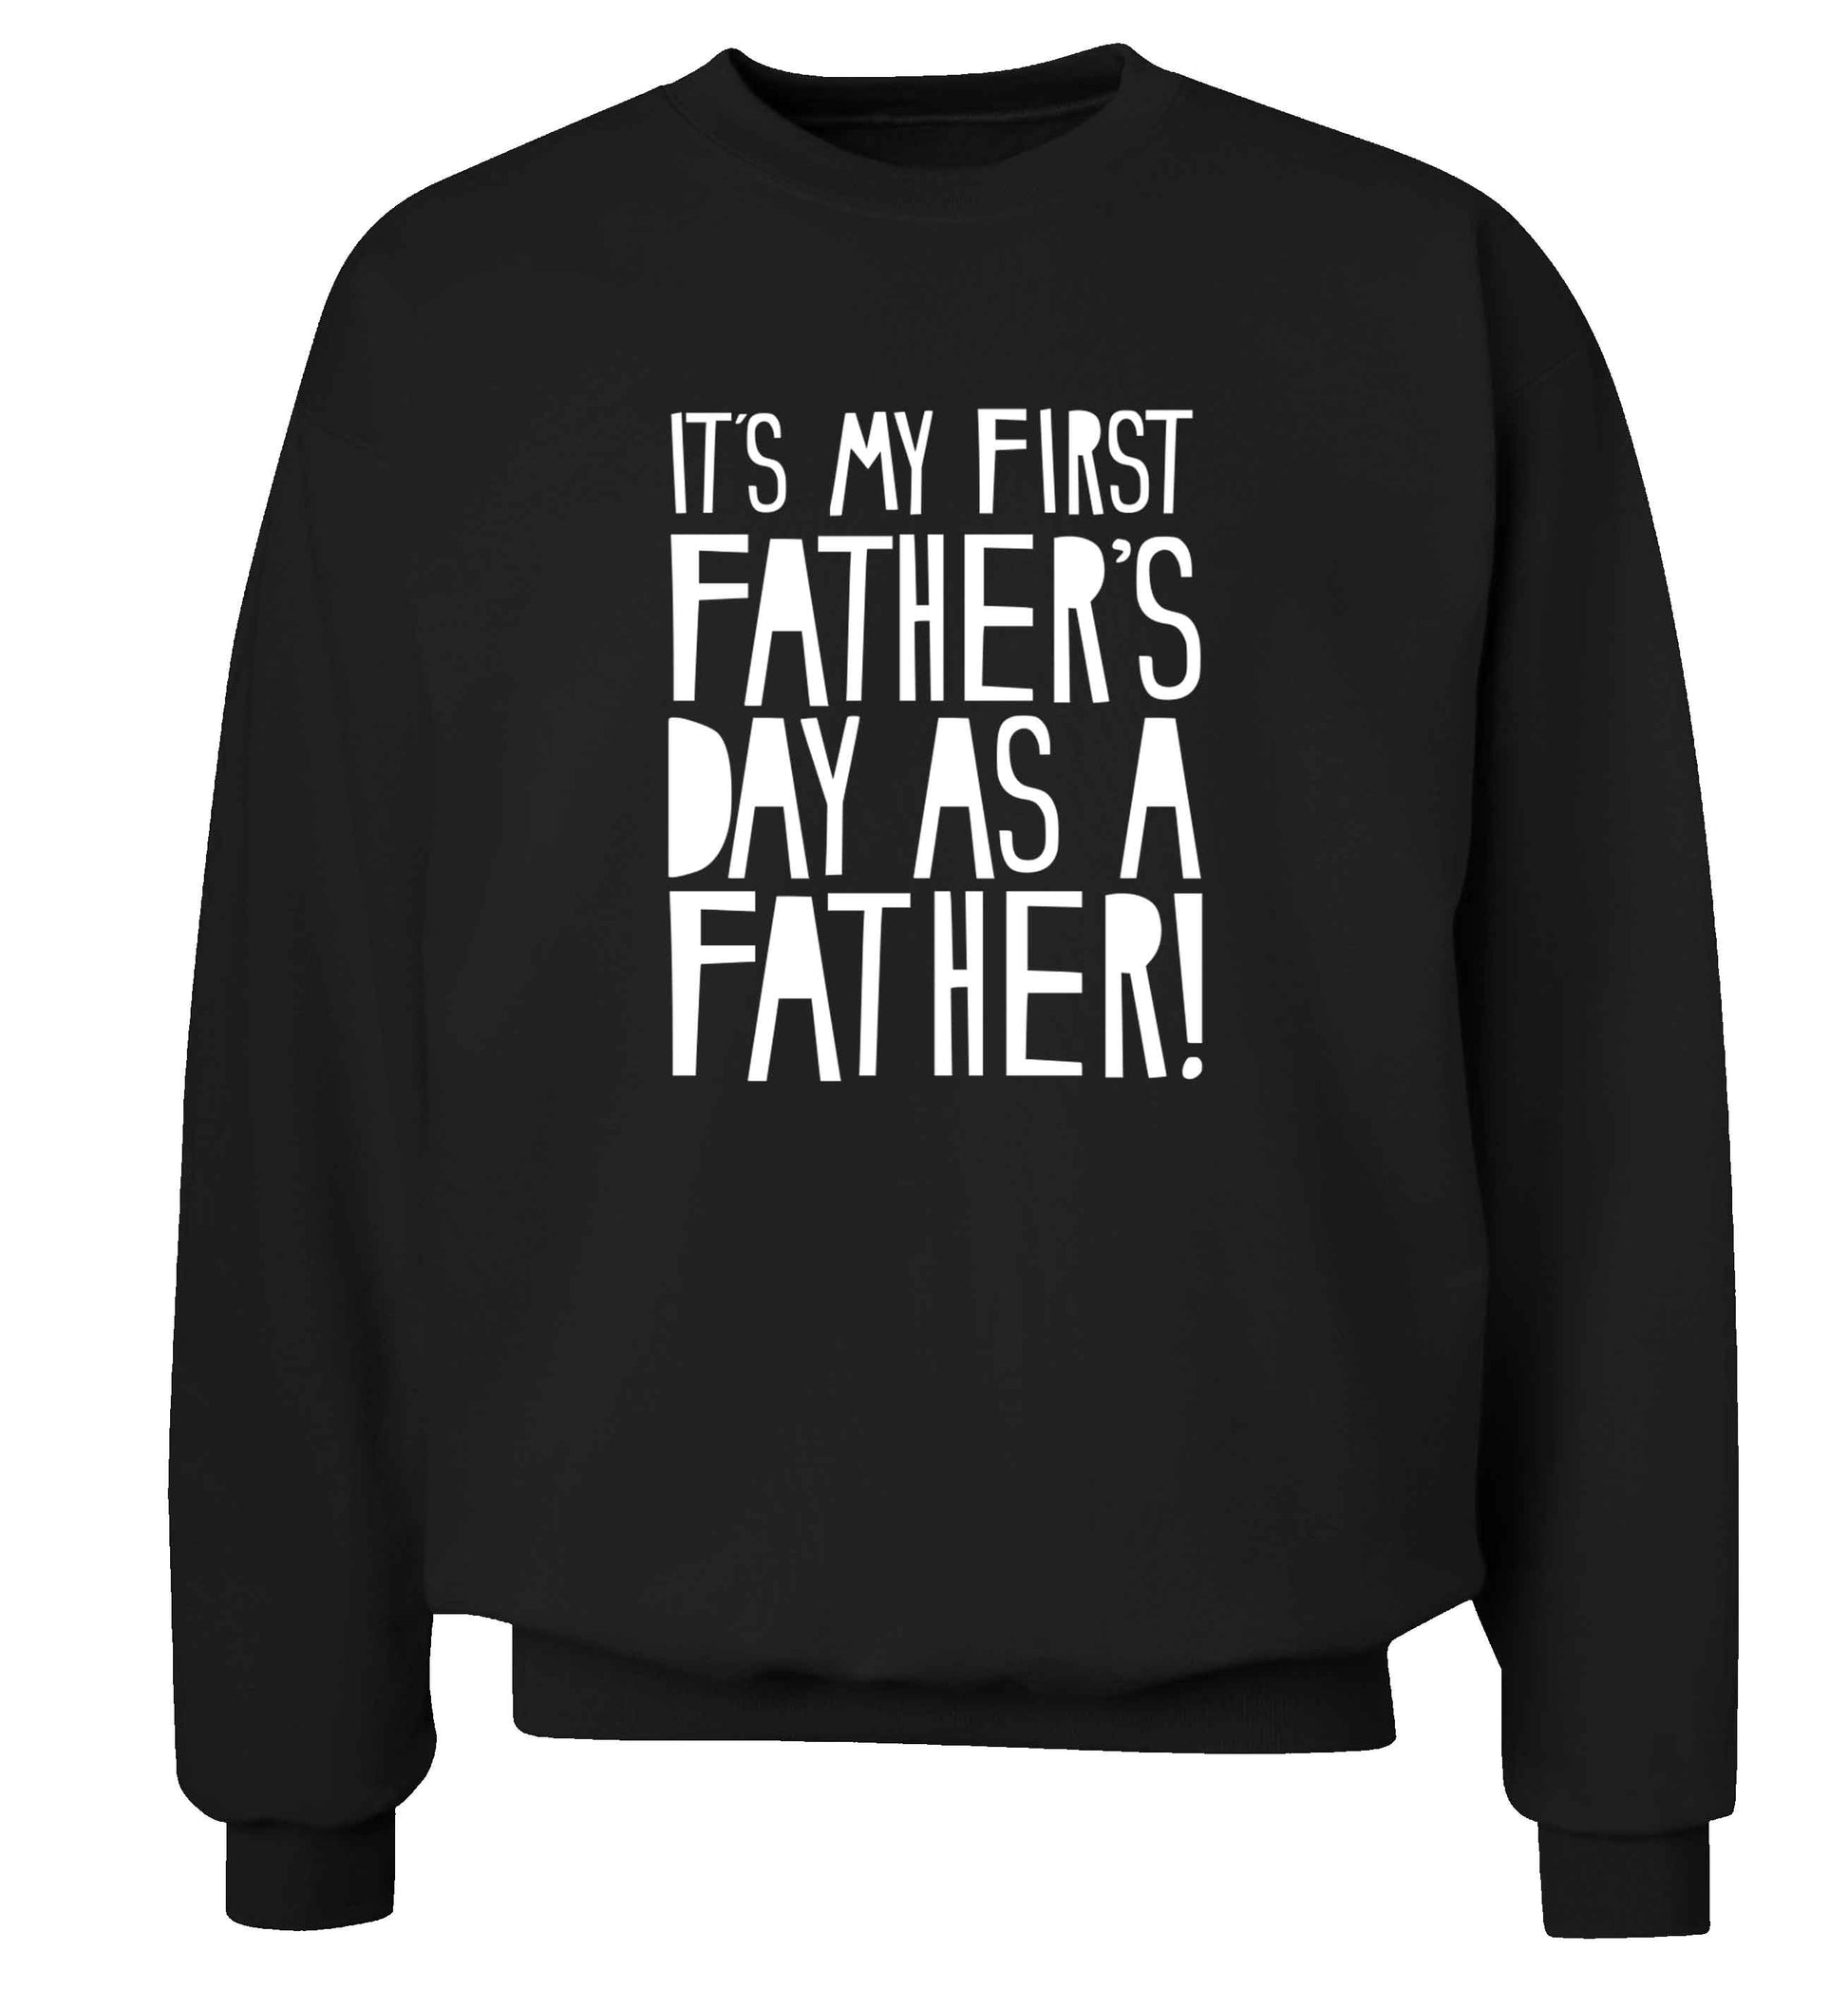 It's my first father's day as a father! adult's unisex black sweater 2XL